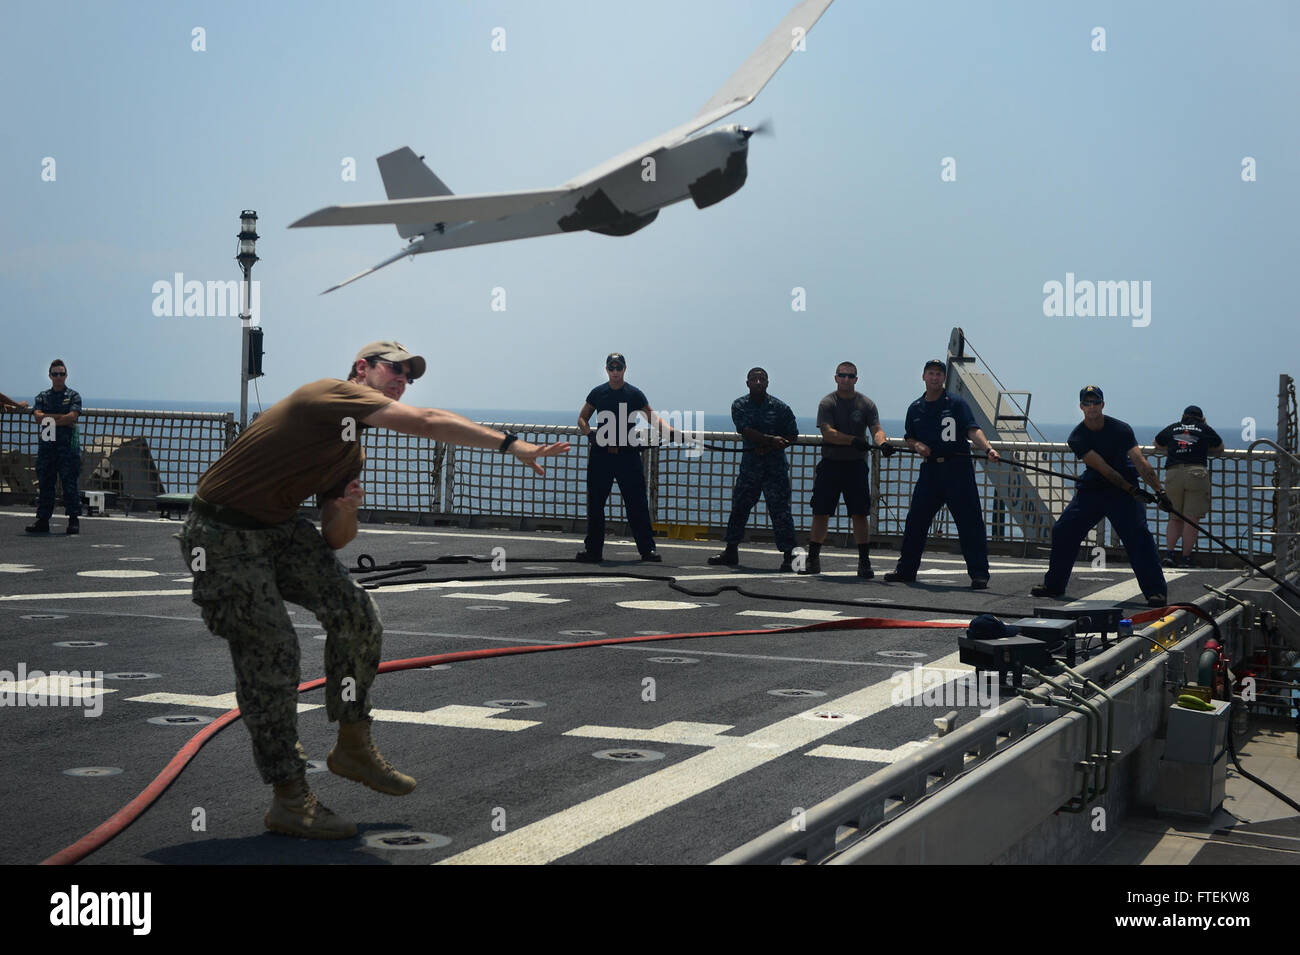 ATLANTIC OCEAN (Feb. 10, 2015) Information Technology Specialist 2nd Class Joshua Lesperance, from Spring Valley, Illinois, launches the RQ-20A  Aqua Puma small unmanned aircraft system off the flight deck of the Military Sealift Command's joint high-speed vessel USNS Spearhead (JHSV 1) Feb. 10, 2015. Spearhead is on a scheduled deployment to the U.S. 6th Fleet area of operations in support of the international collaborative capacity-building program Africa Partnership Station (APS). (U.S. Navy photo by Mass Communication Specialist 1st Class Joshua Davies/Released) Stock Photo